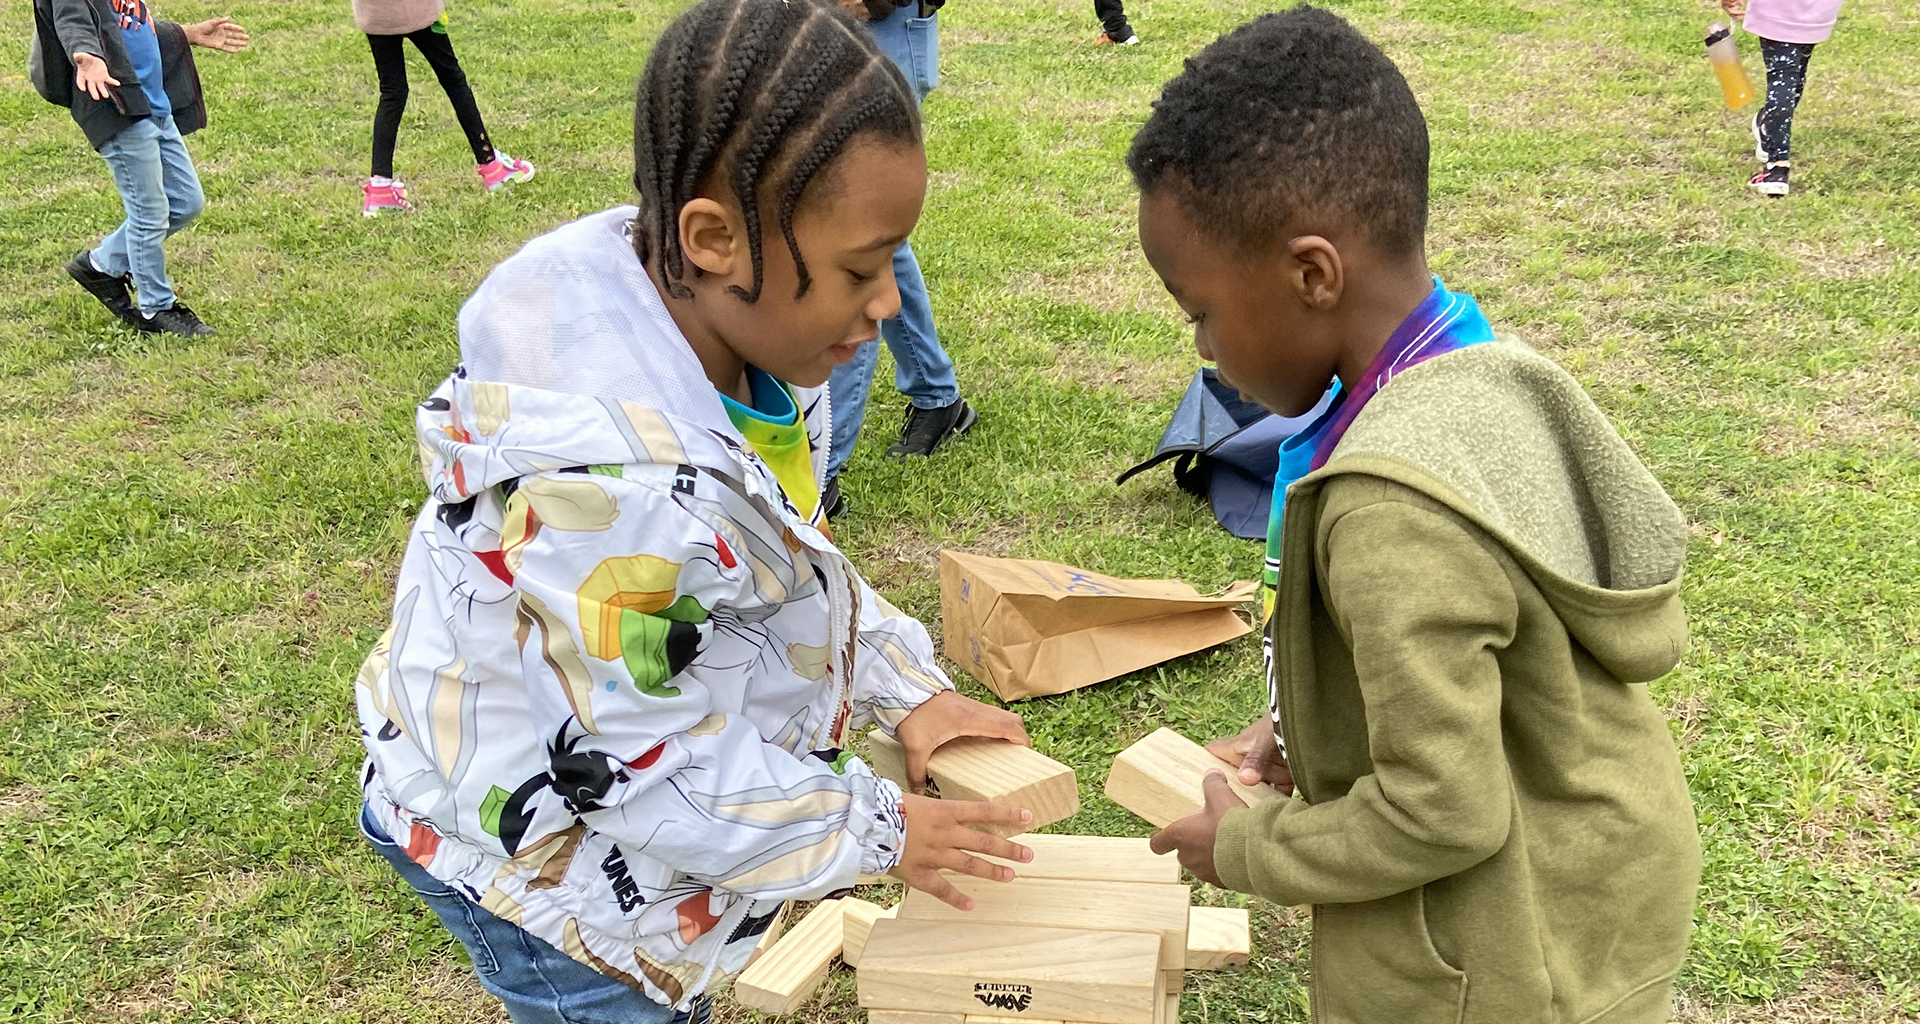 Two students playing with wooden blocks outside